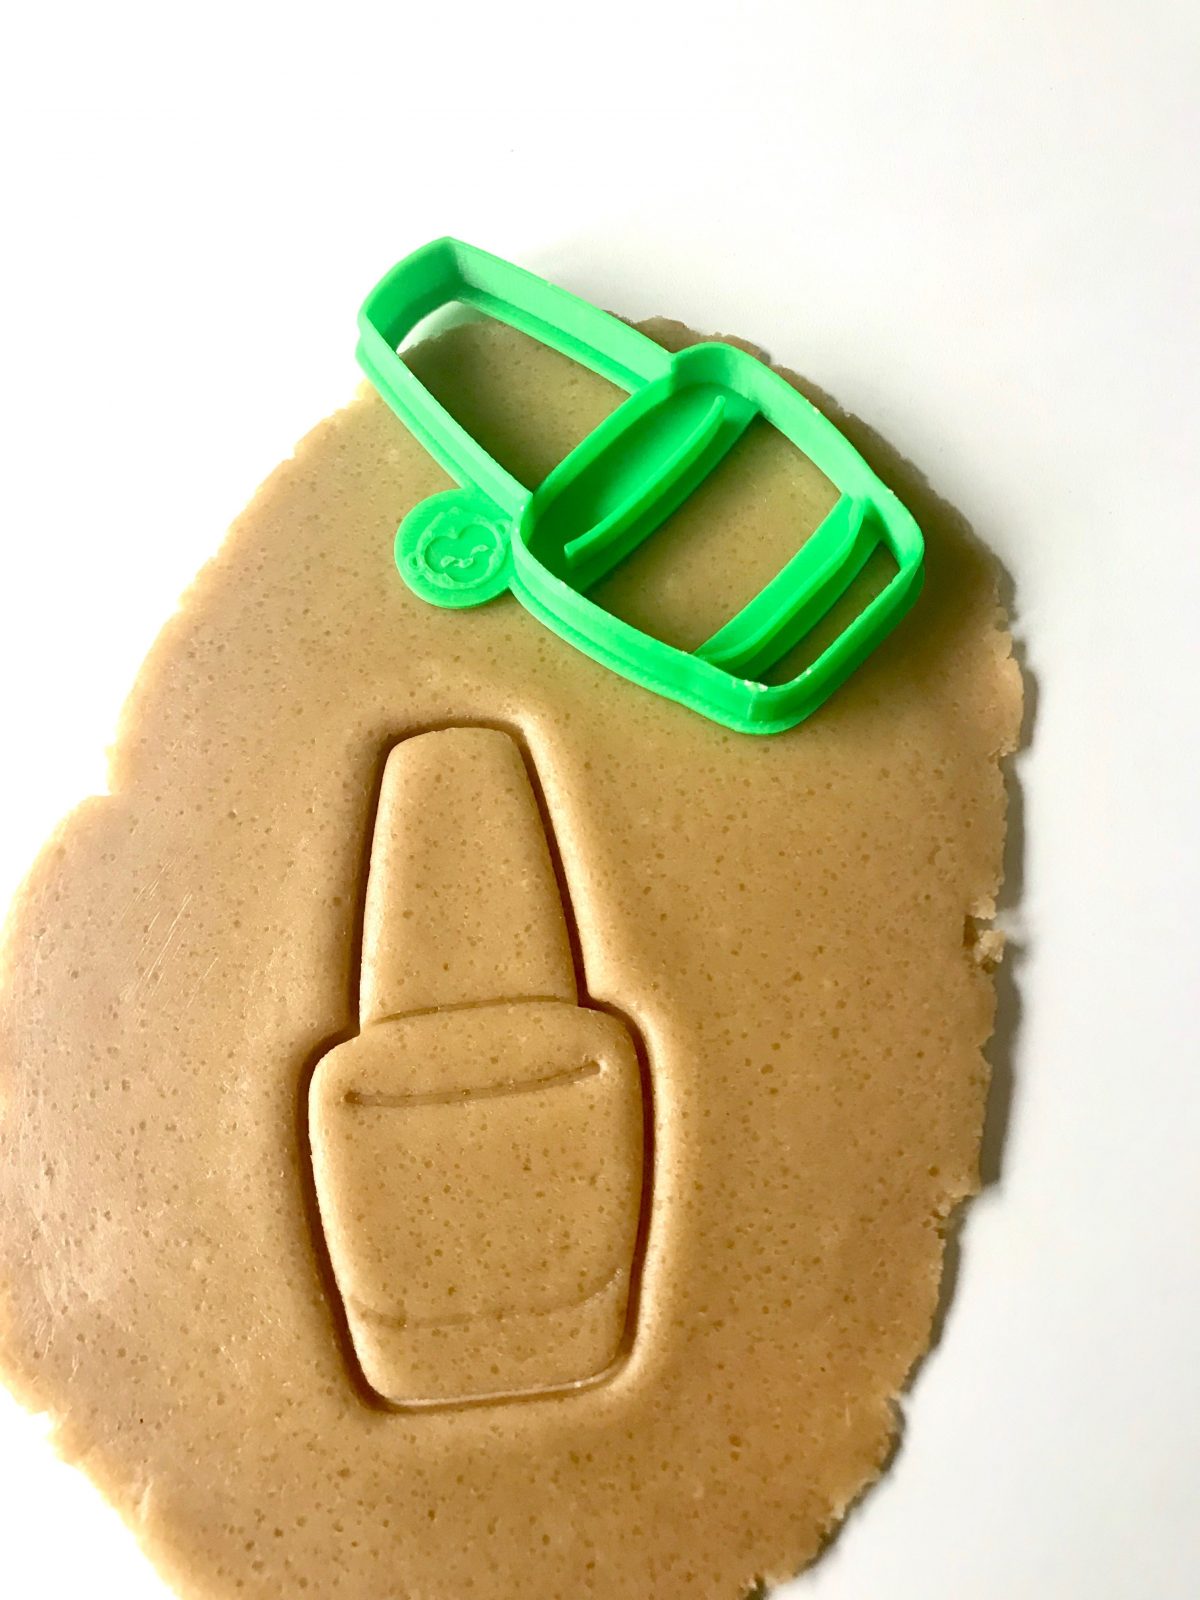 nail polish cookie cutter on dough